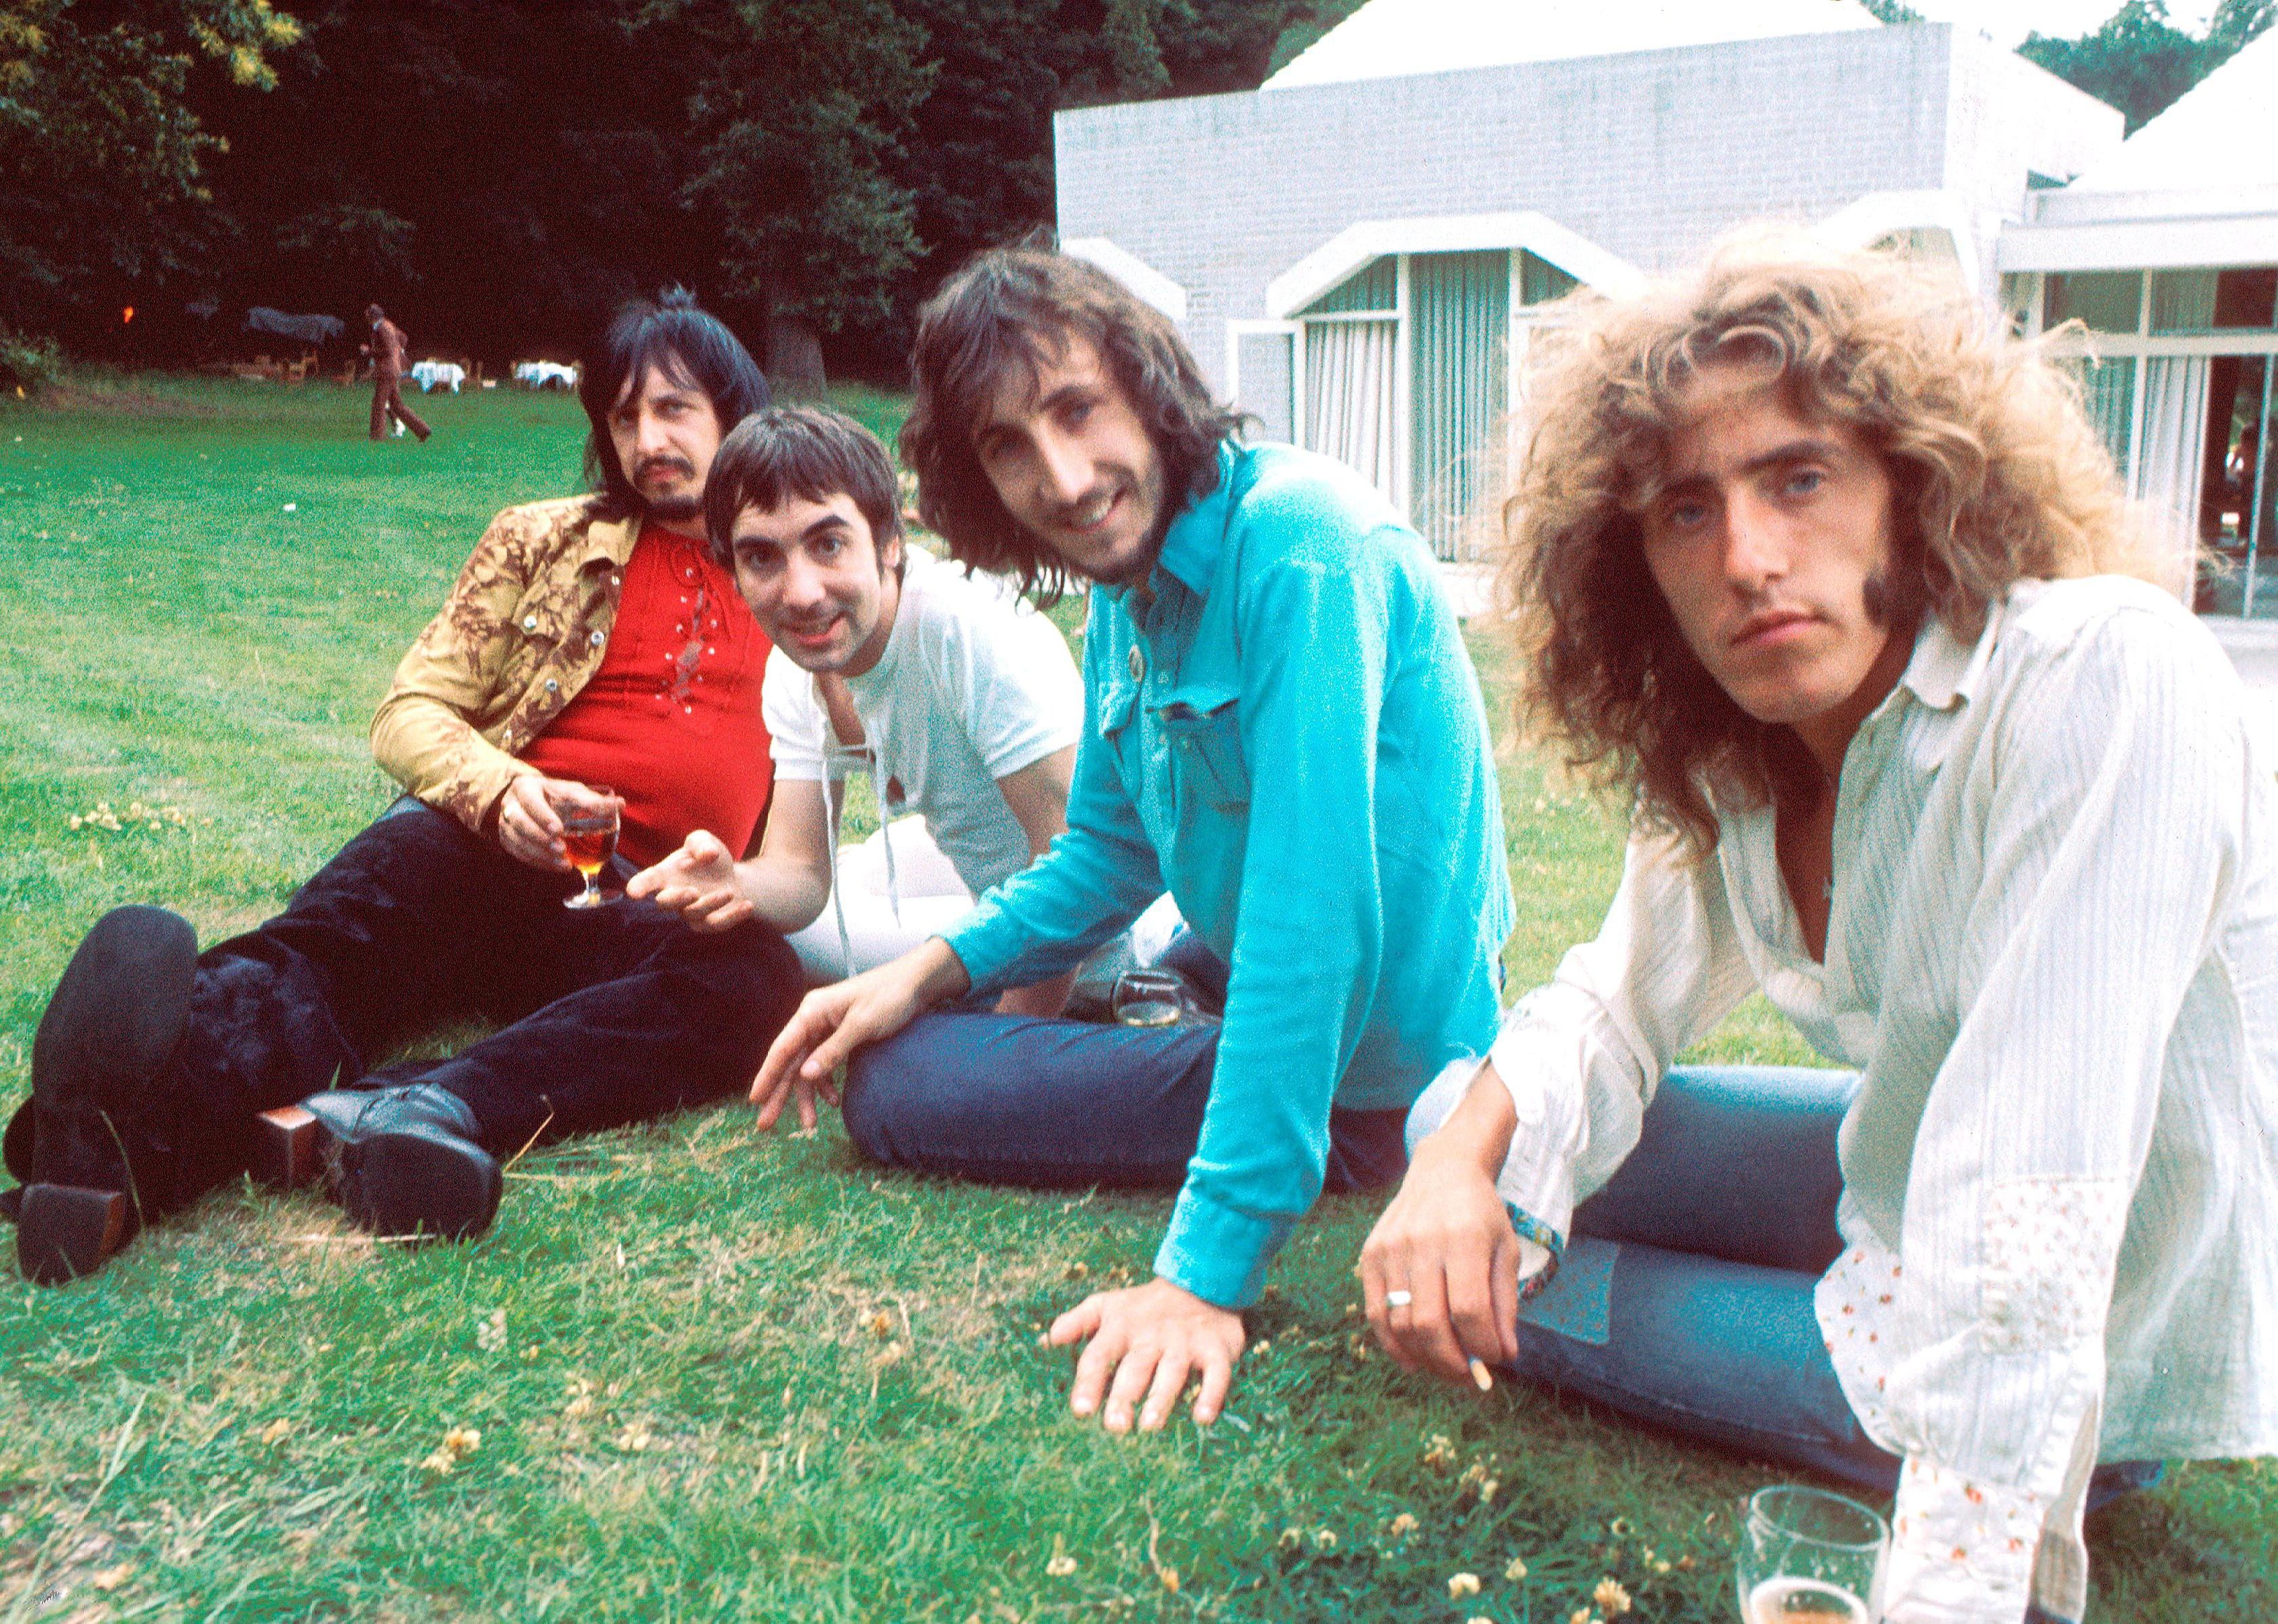 Posed group photo of the Who outside on lawn.